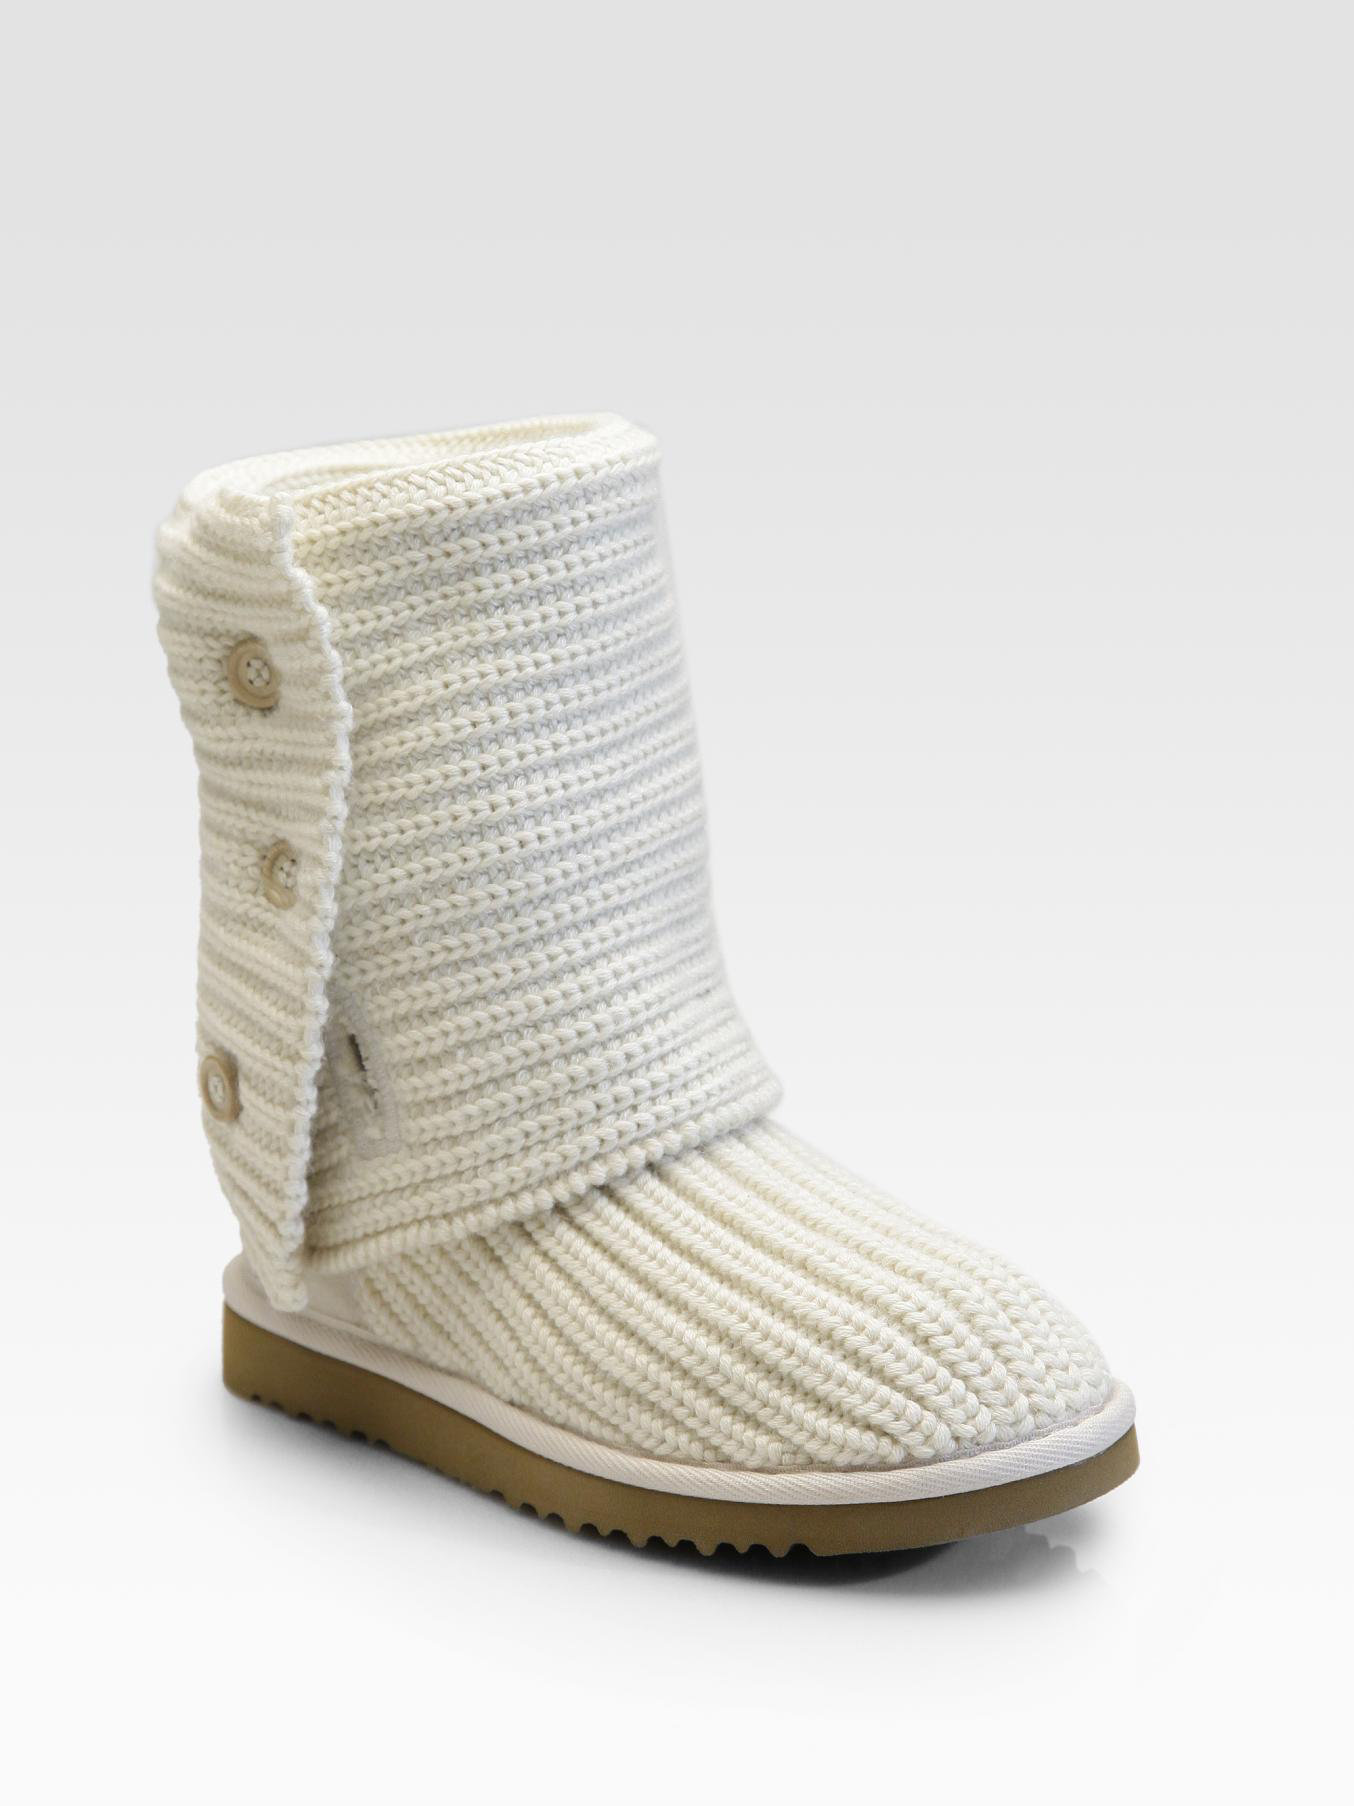 classic cardy boot